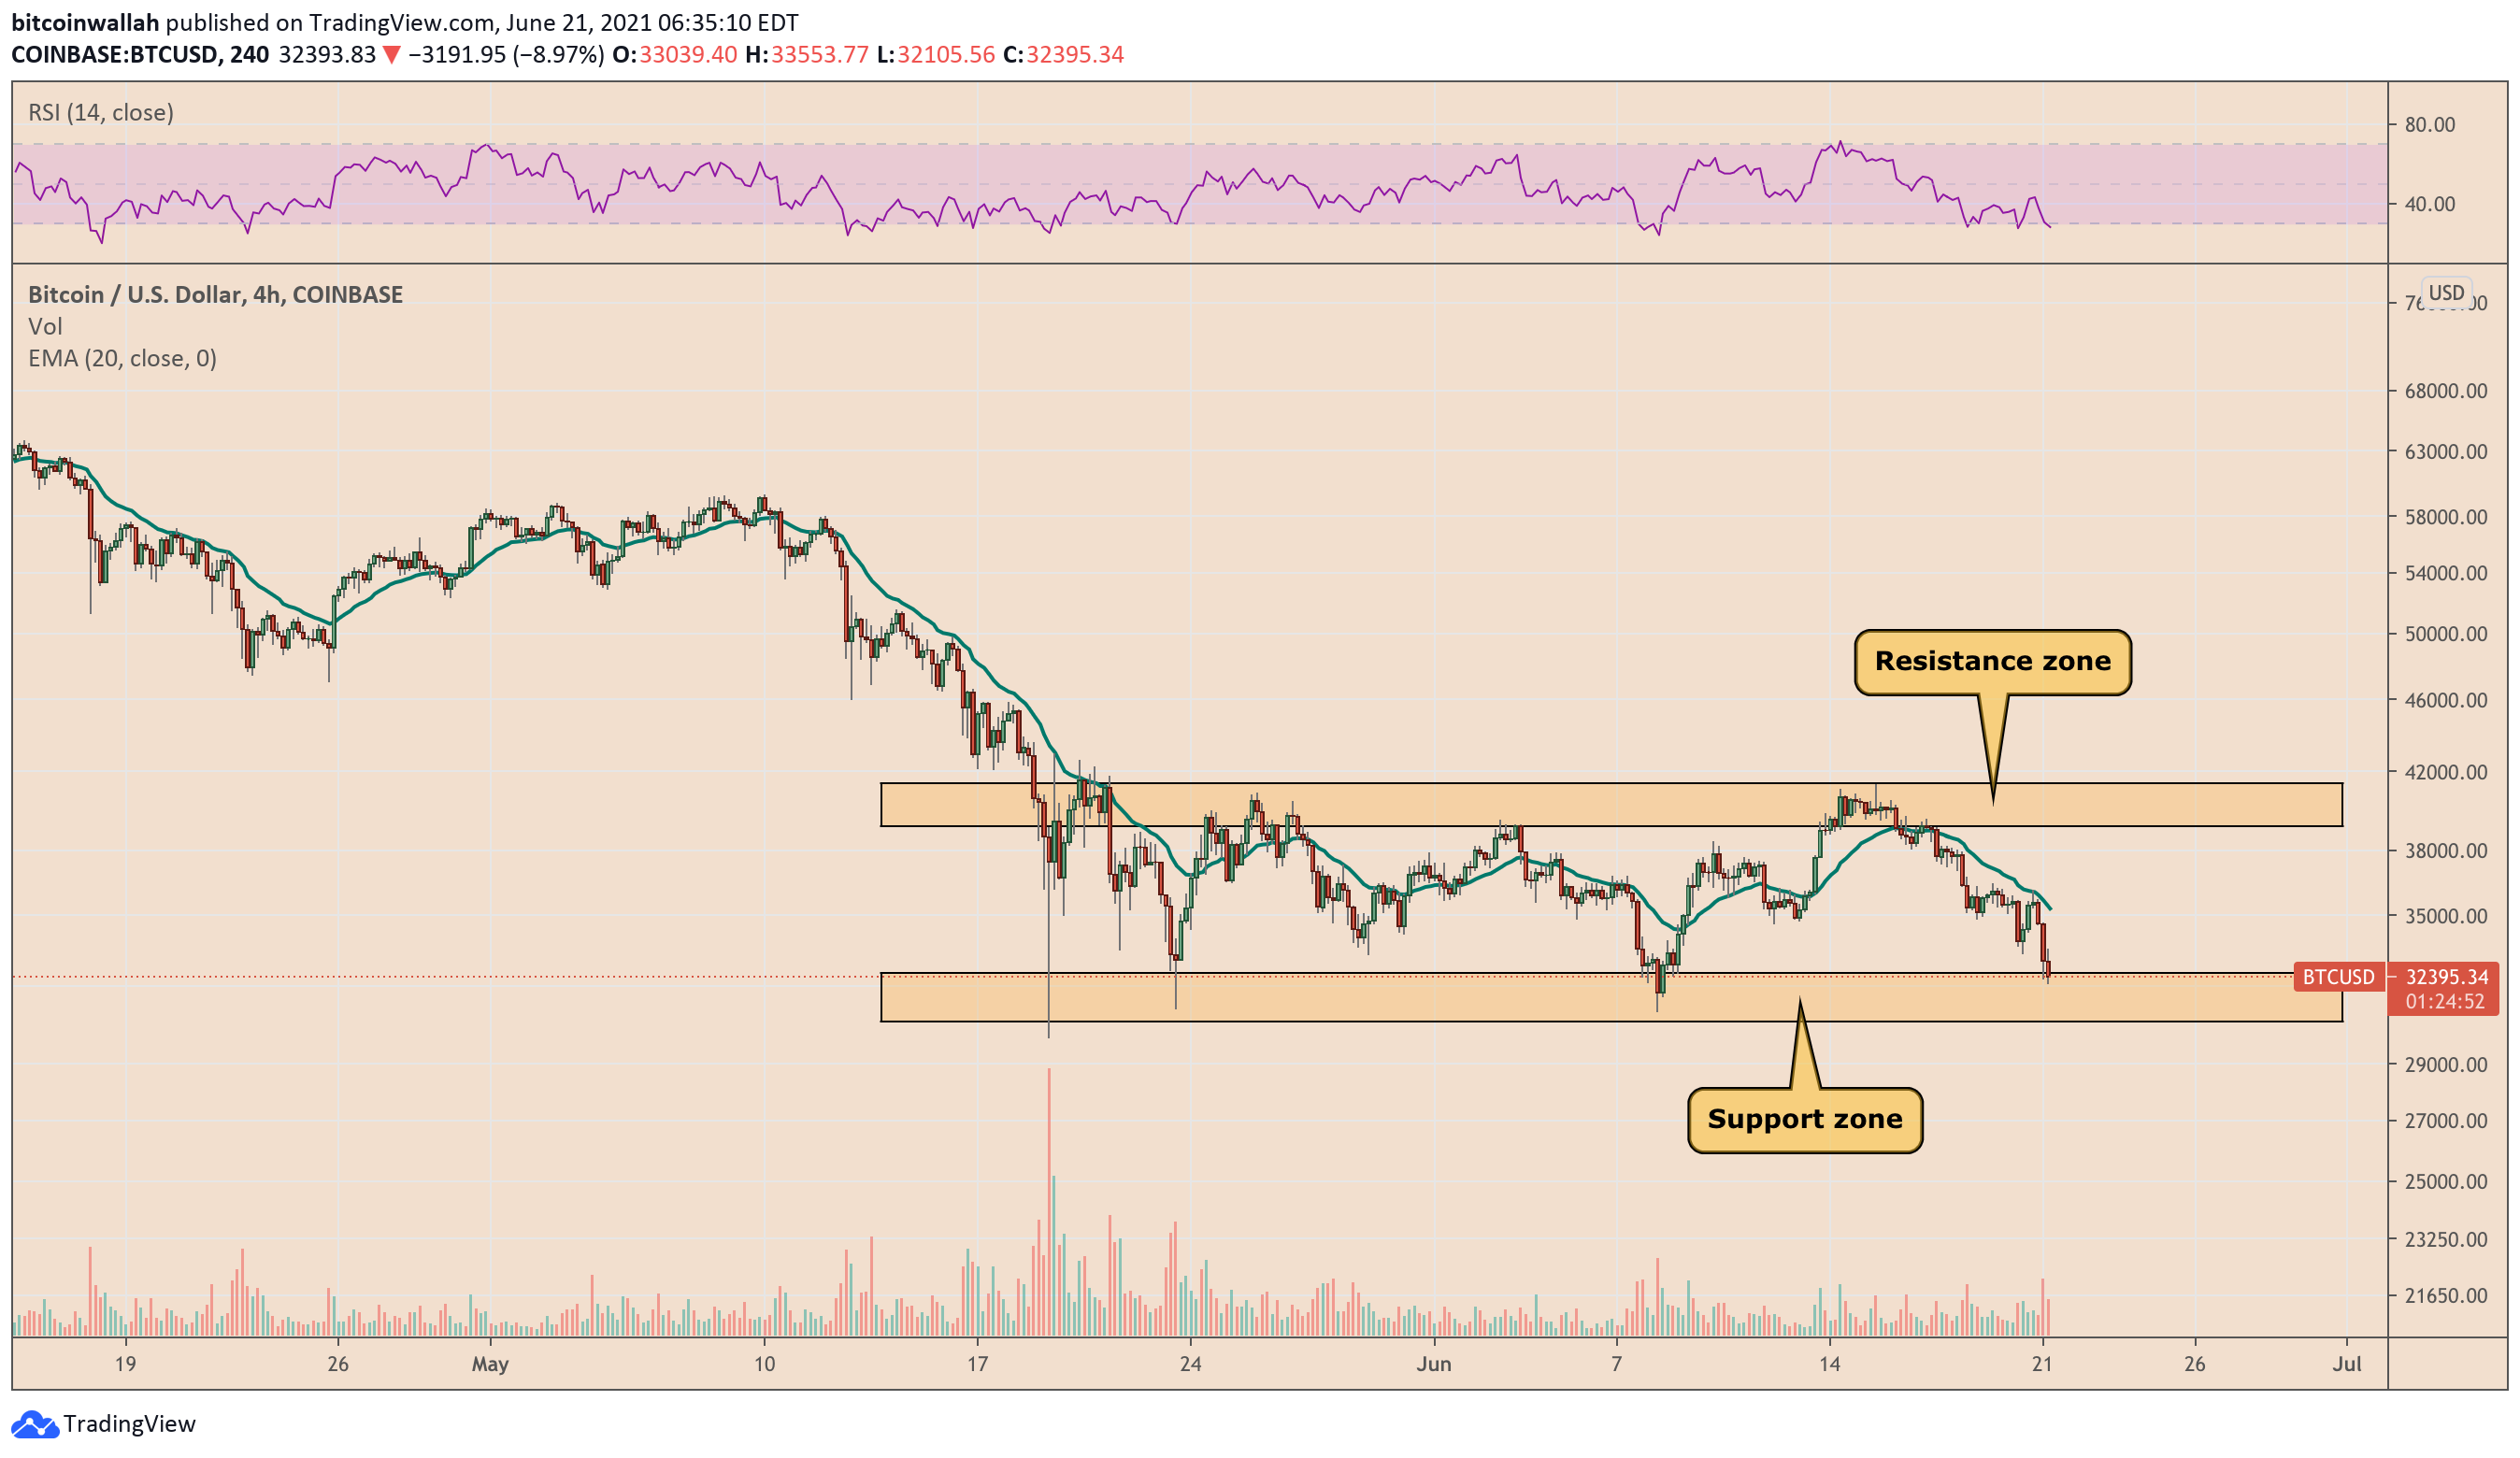 Classic bearish chart pattern forms for Bitcoin as BTC price tumbles to K